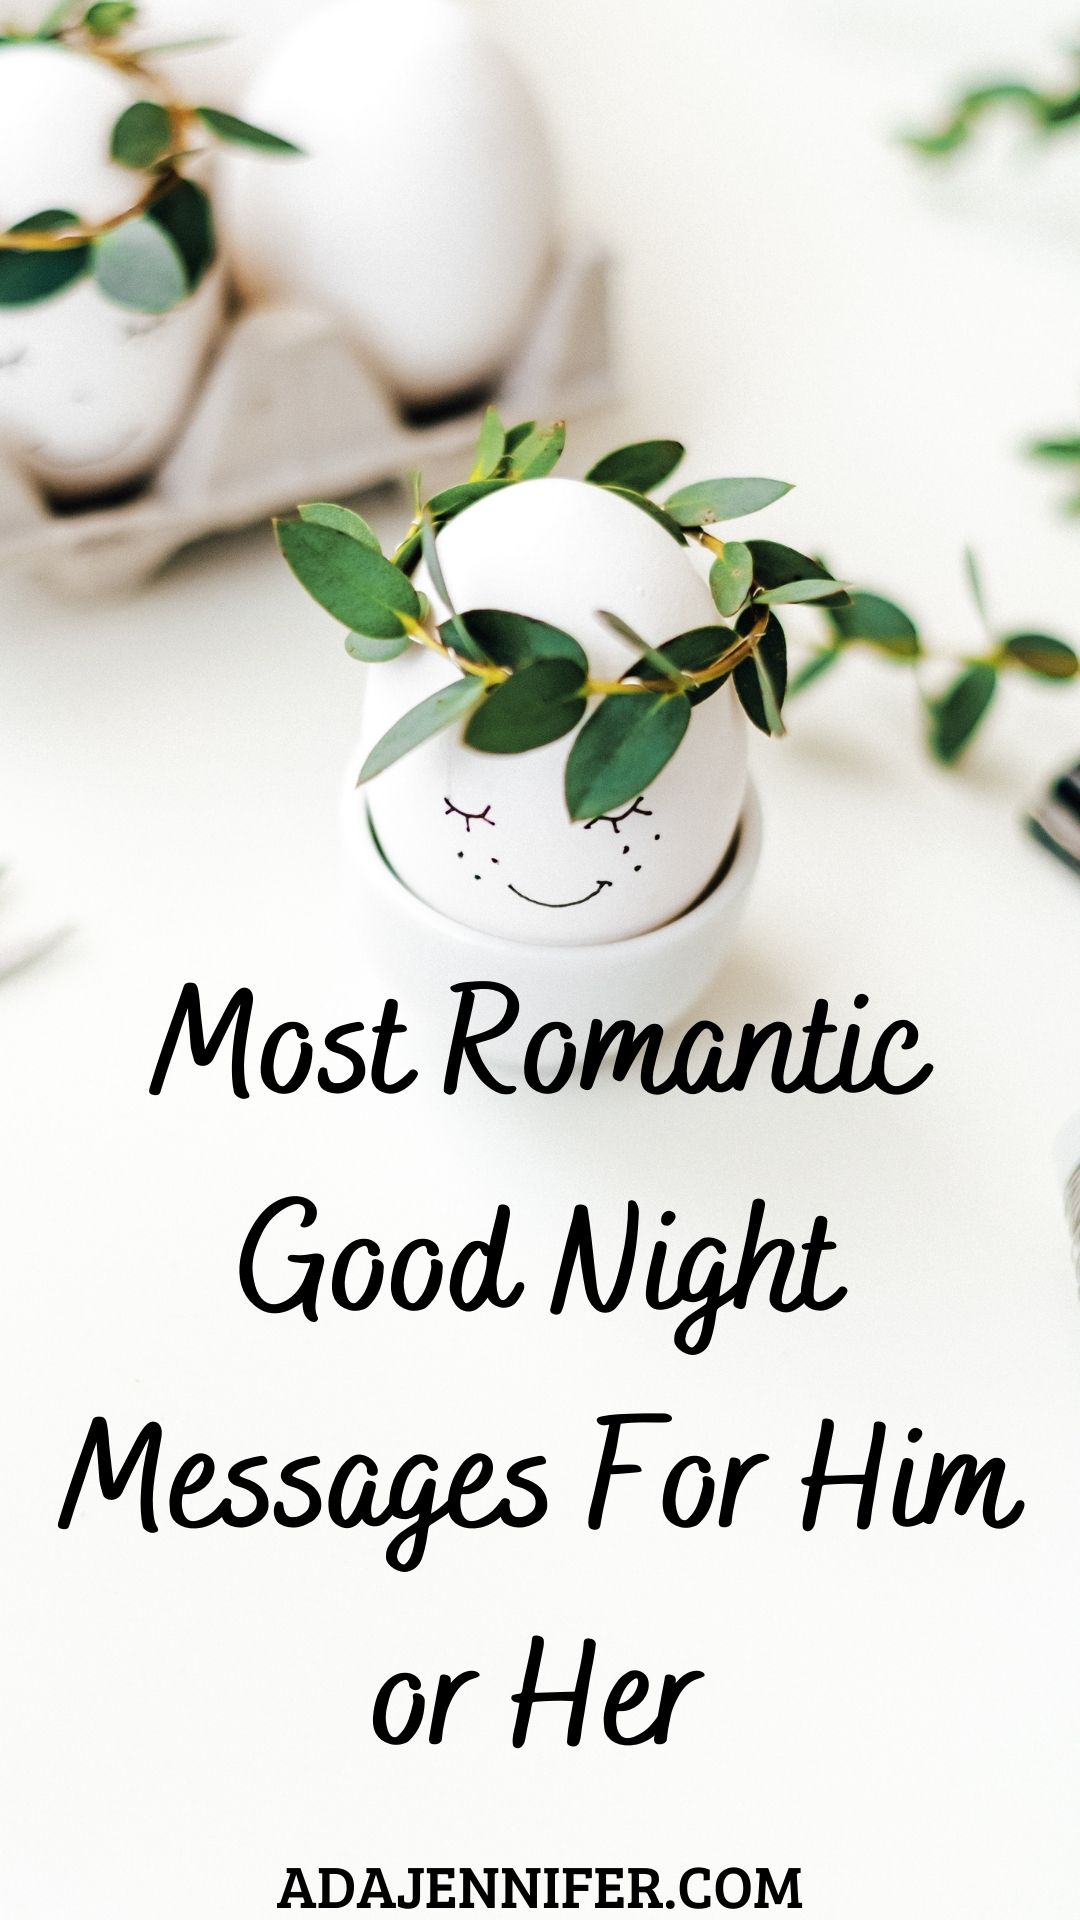 The Most Romantic Good Night Messages For Him And Her - Ada Jennifer